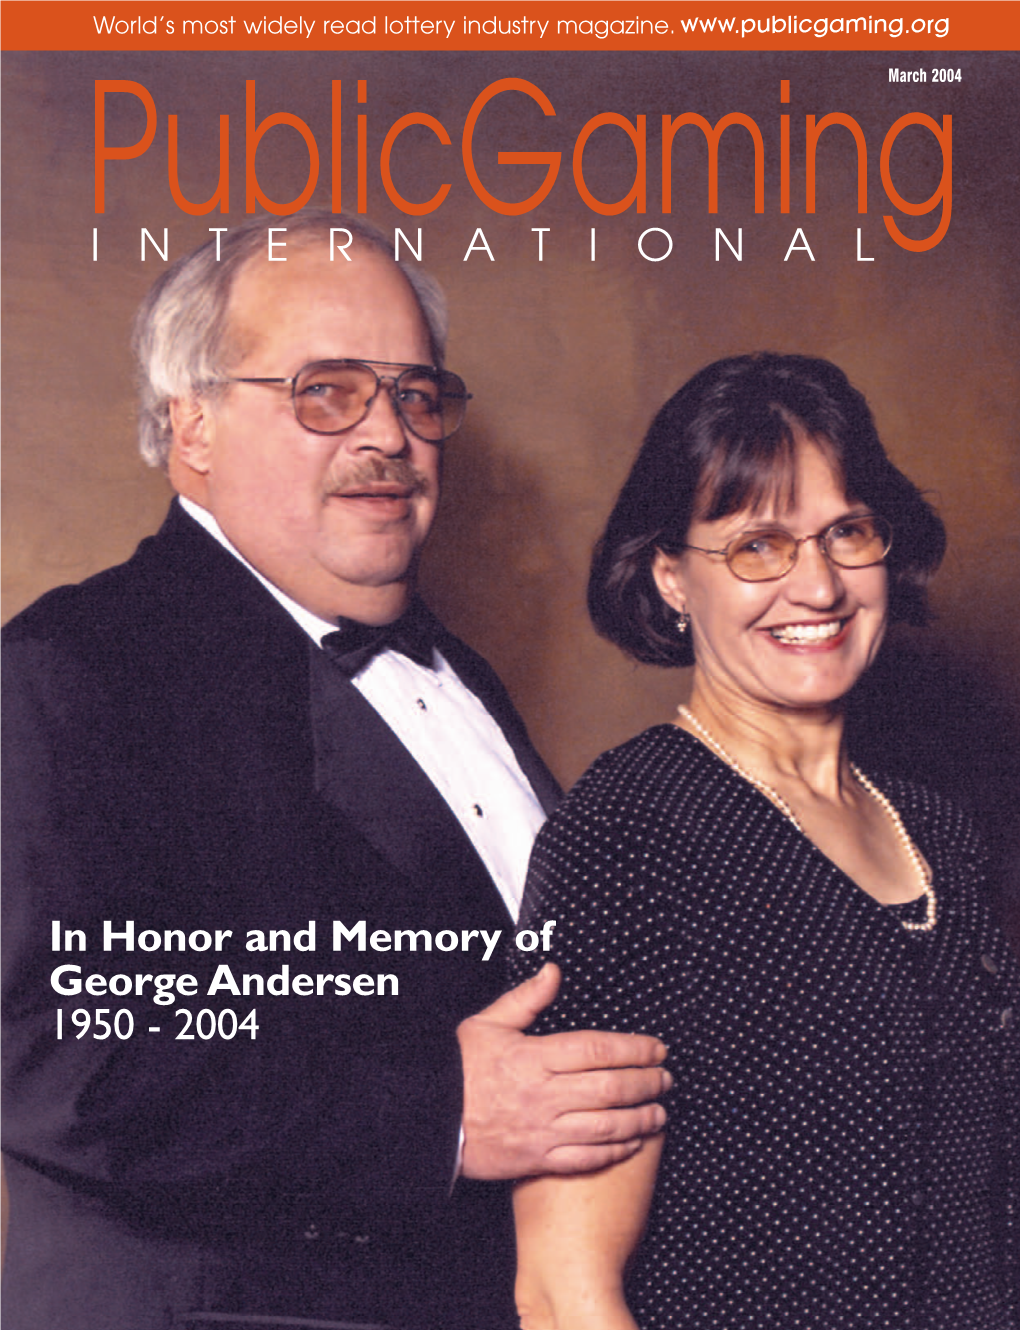 INTERNATIONAL in Honor and Memory of George